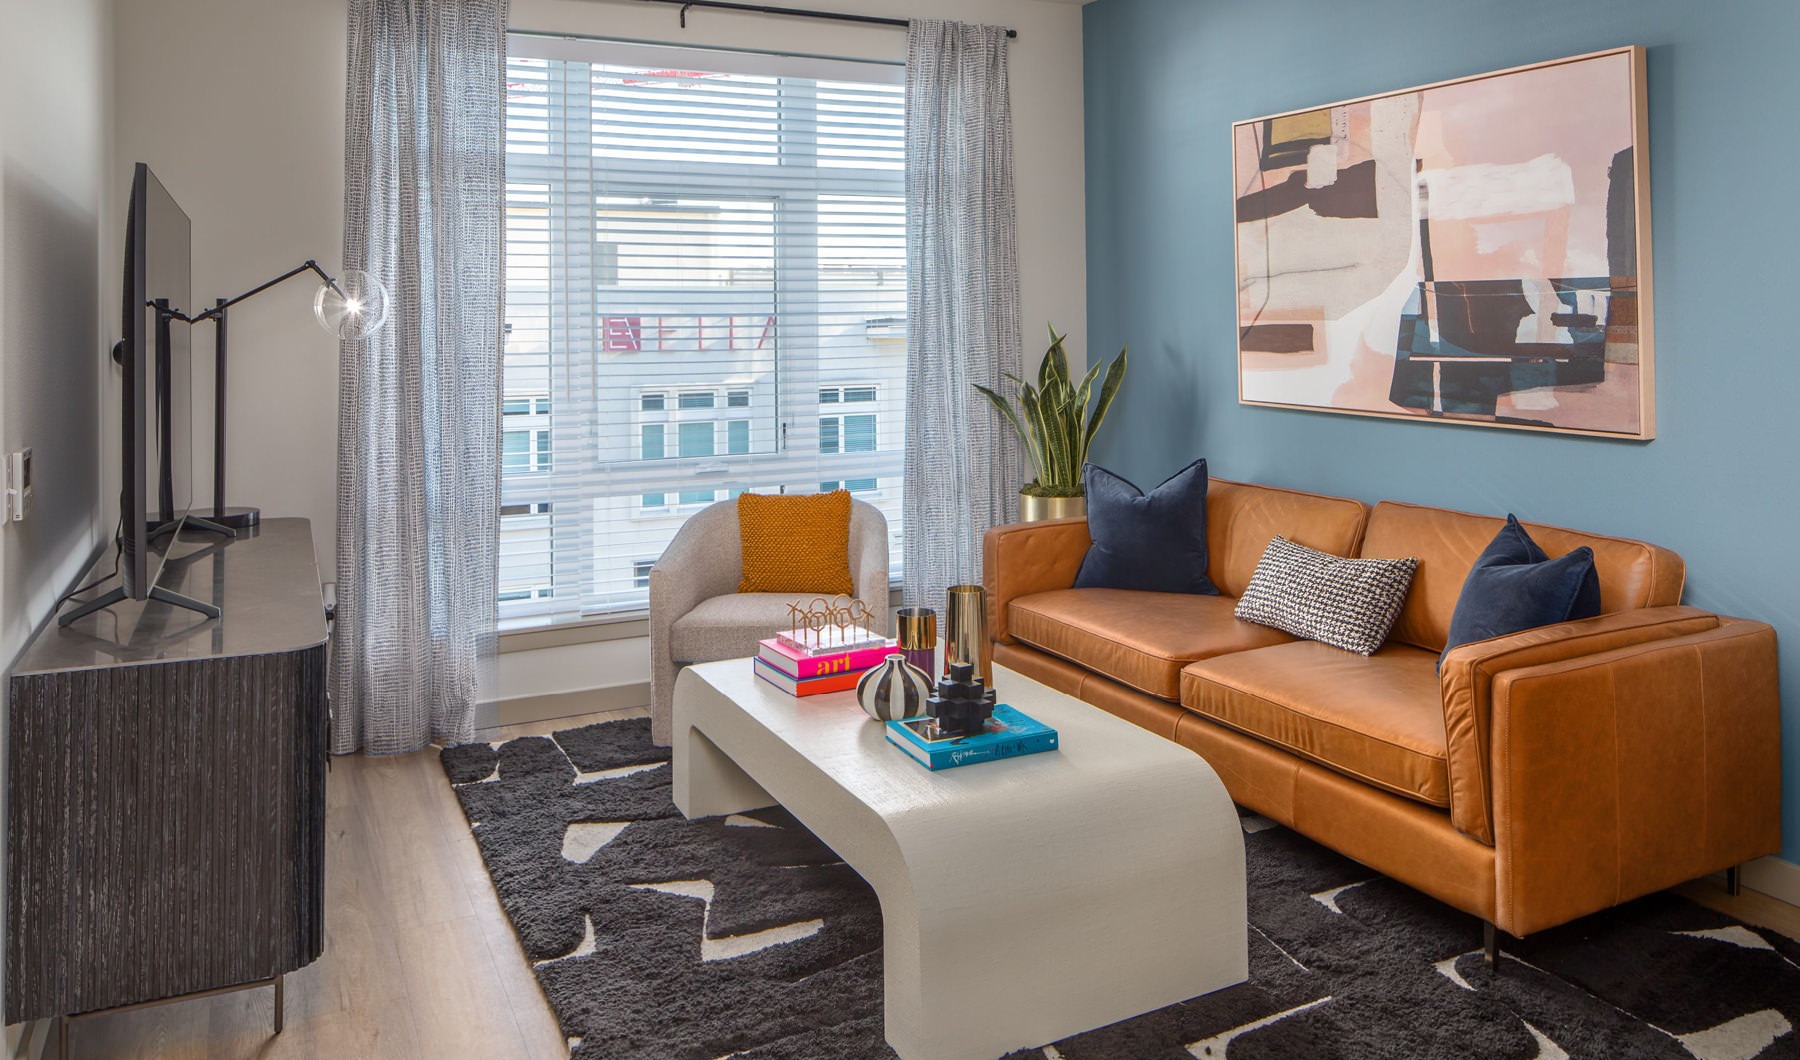 The Dylan is a pet-friendly apartment community in Portland, OR